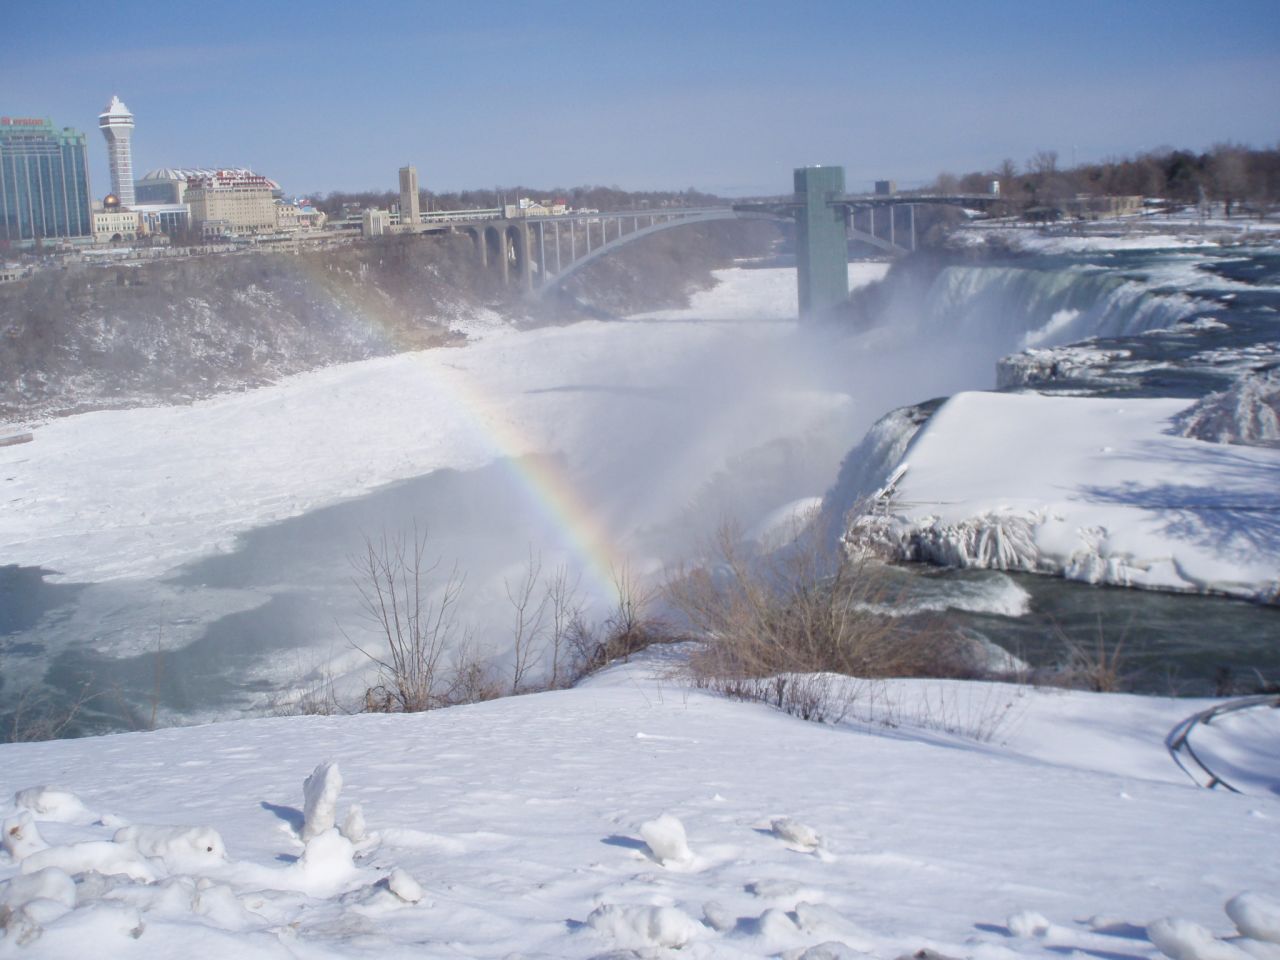 Deanna Rodrigues took this image of Niagara Falls in the winter. She says: "Global warming is causing climatic changes in the region," adding that spring has been arriving earlier than usual, summers are getting warmer and winters more severe.